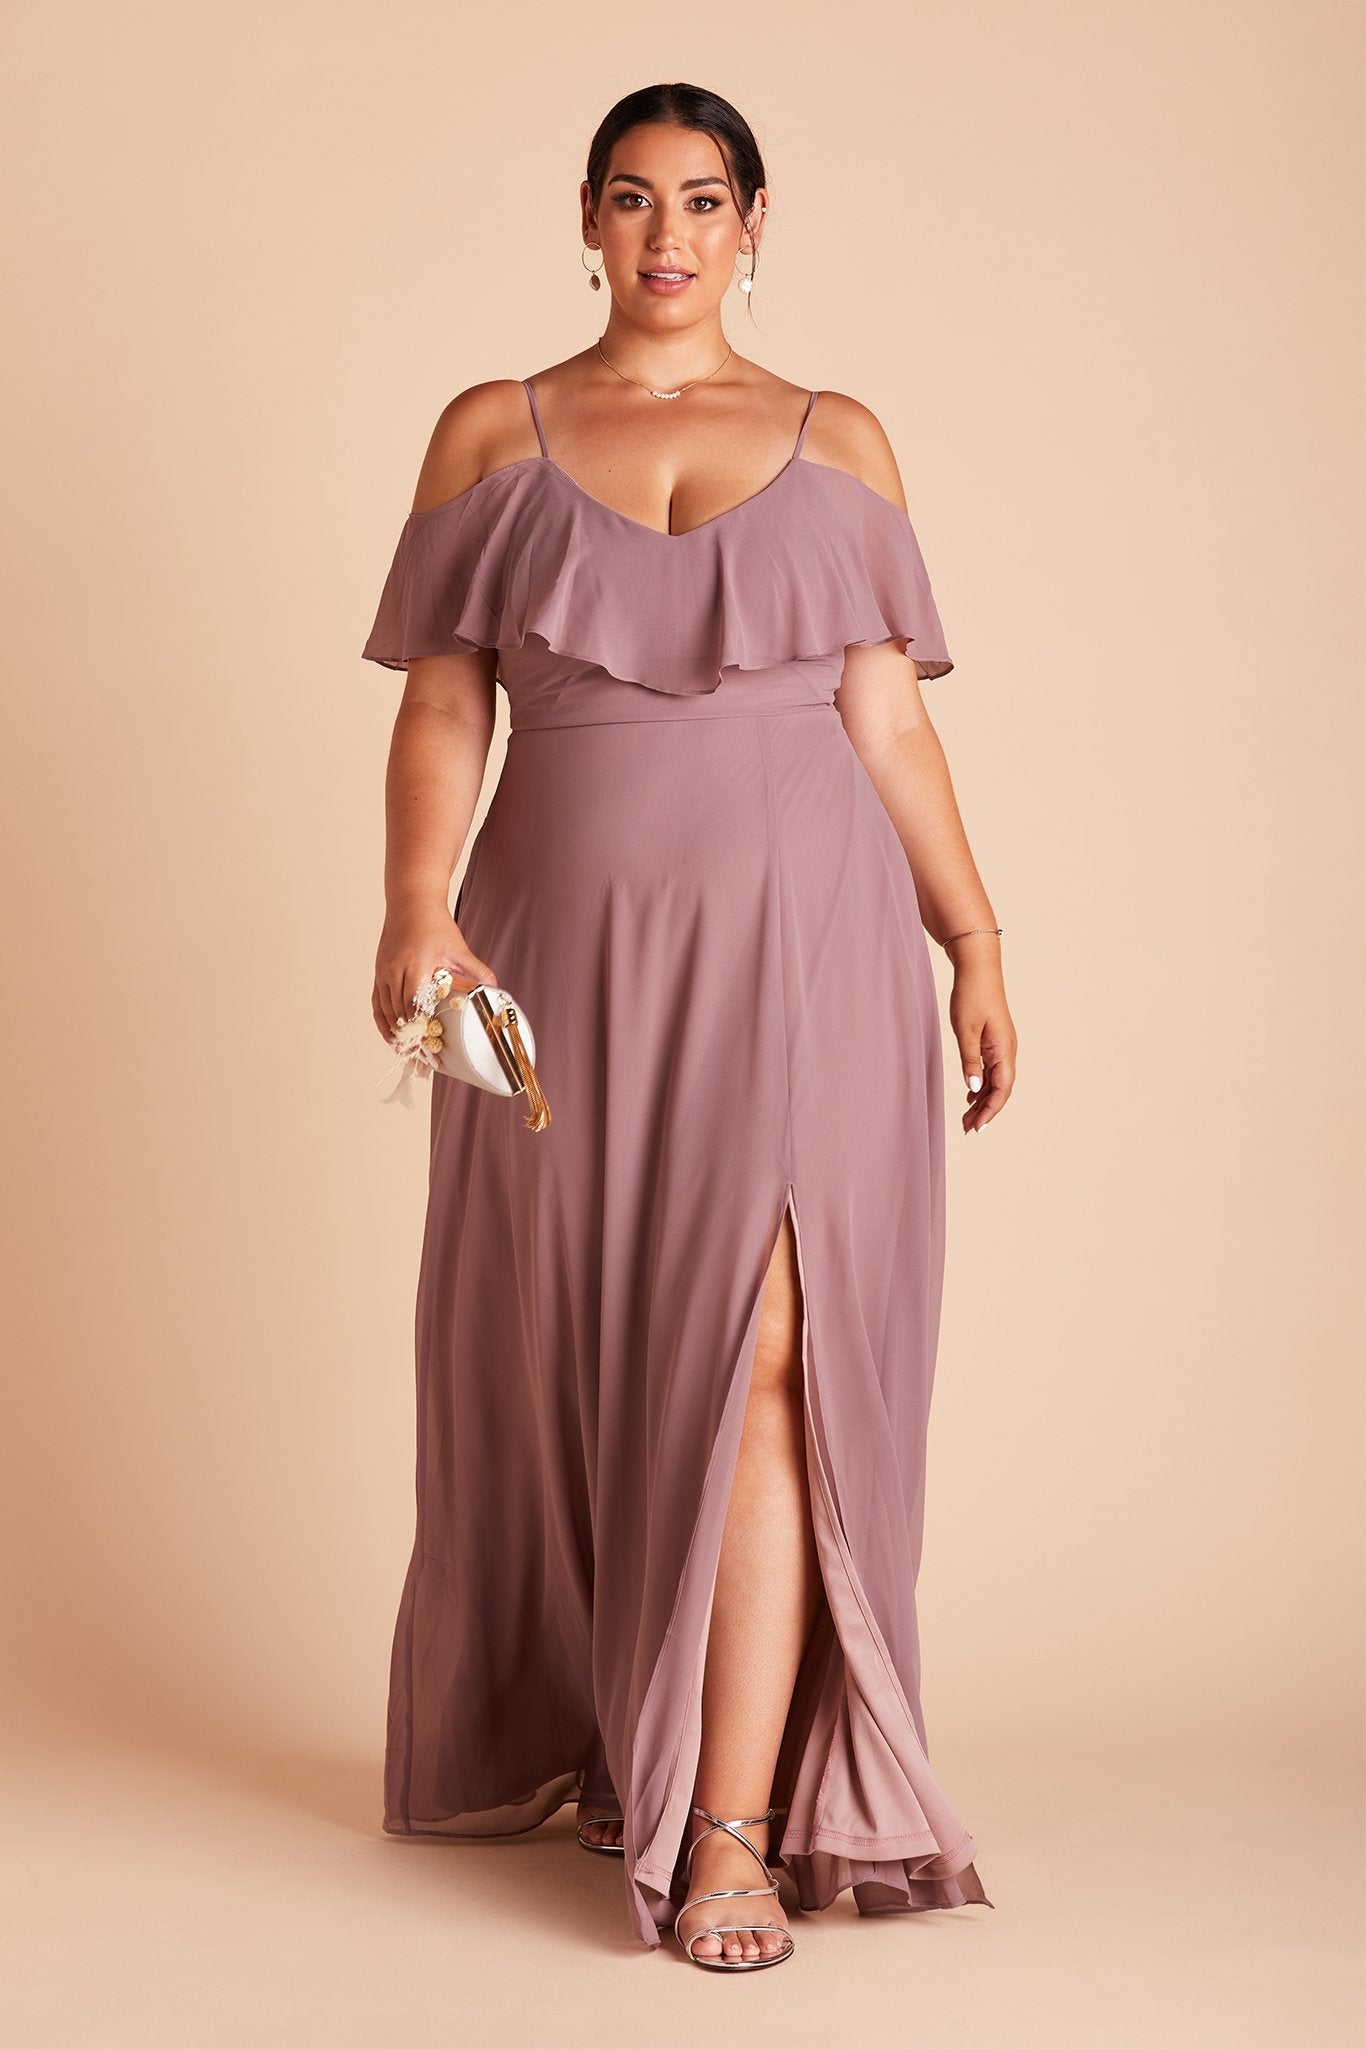 Jane convertible plus size bridesmaid dress with slit in dark mauve chiffon by Birdy Grey, front view